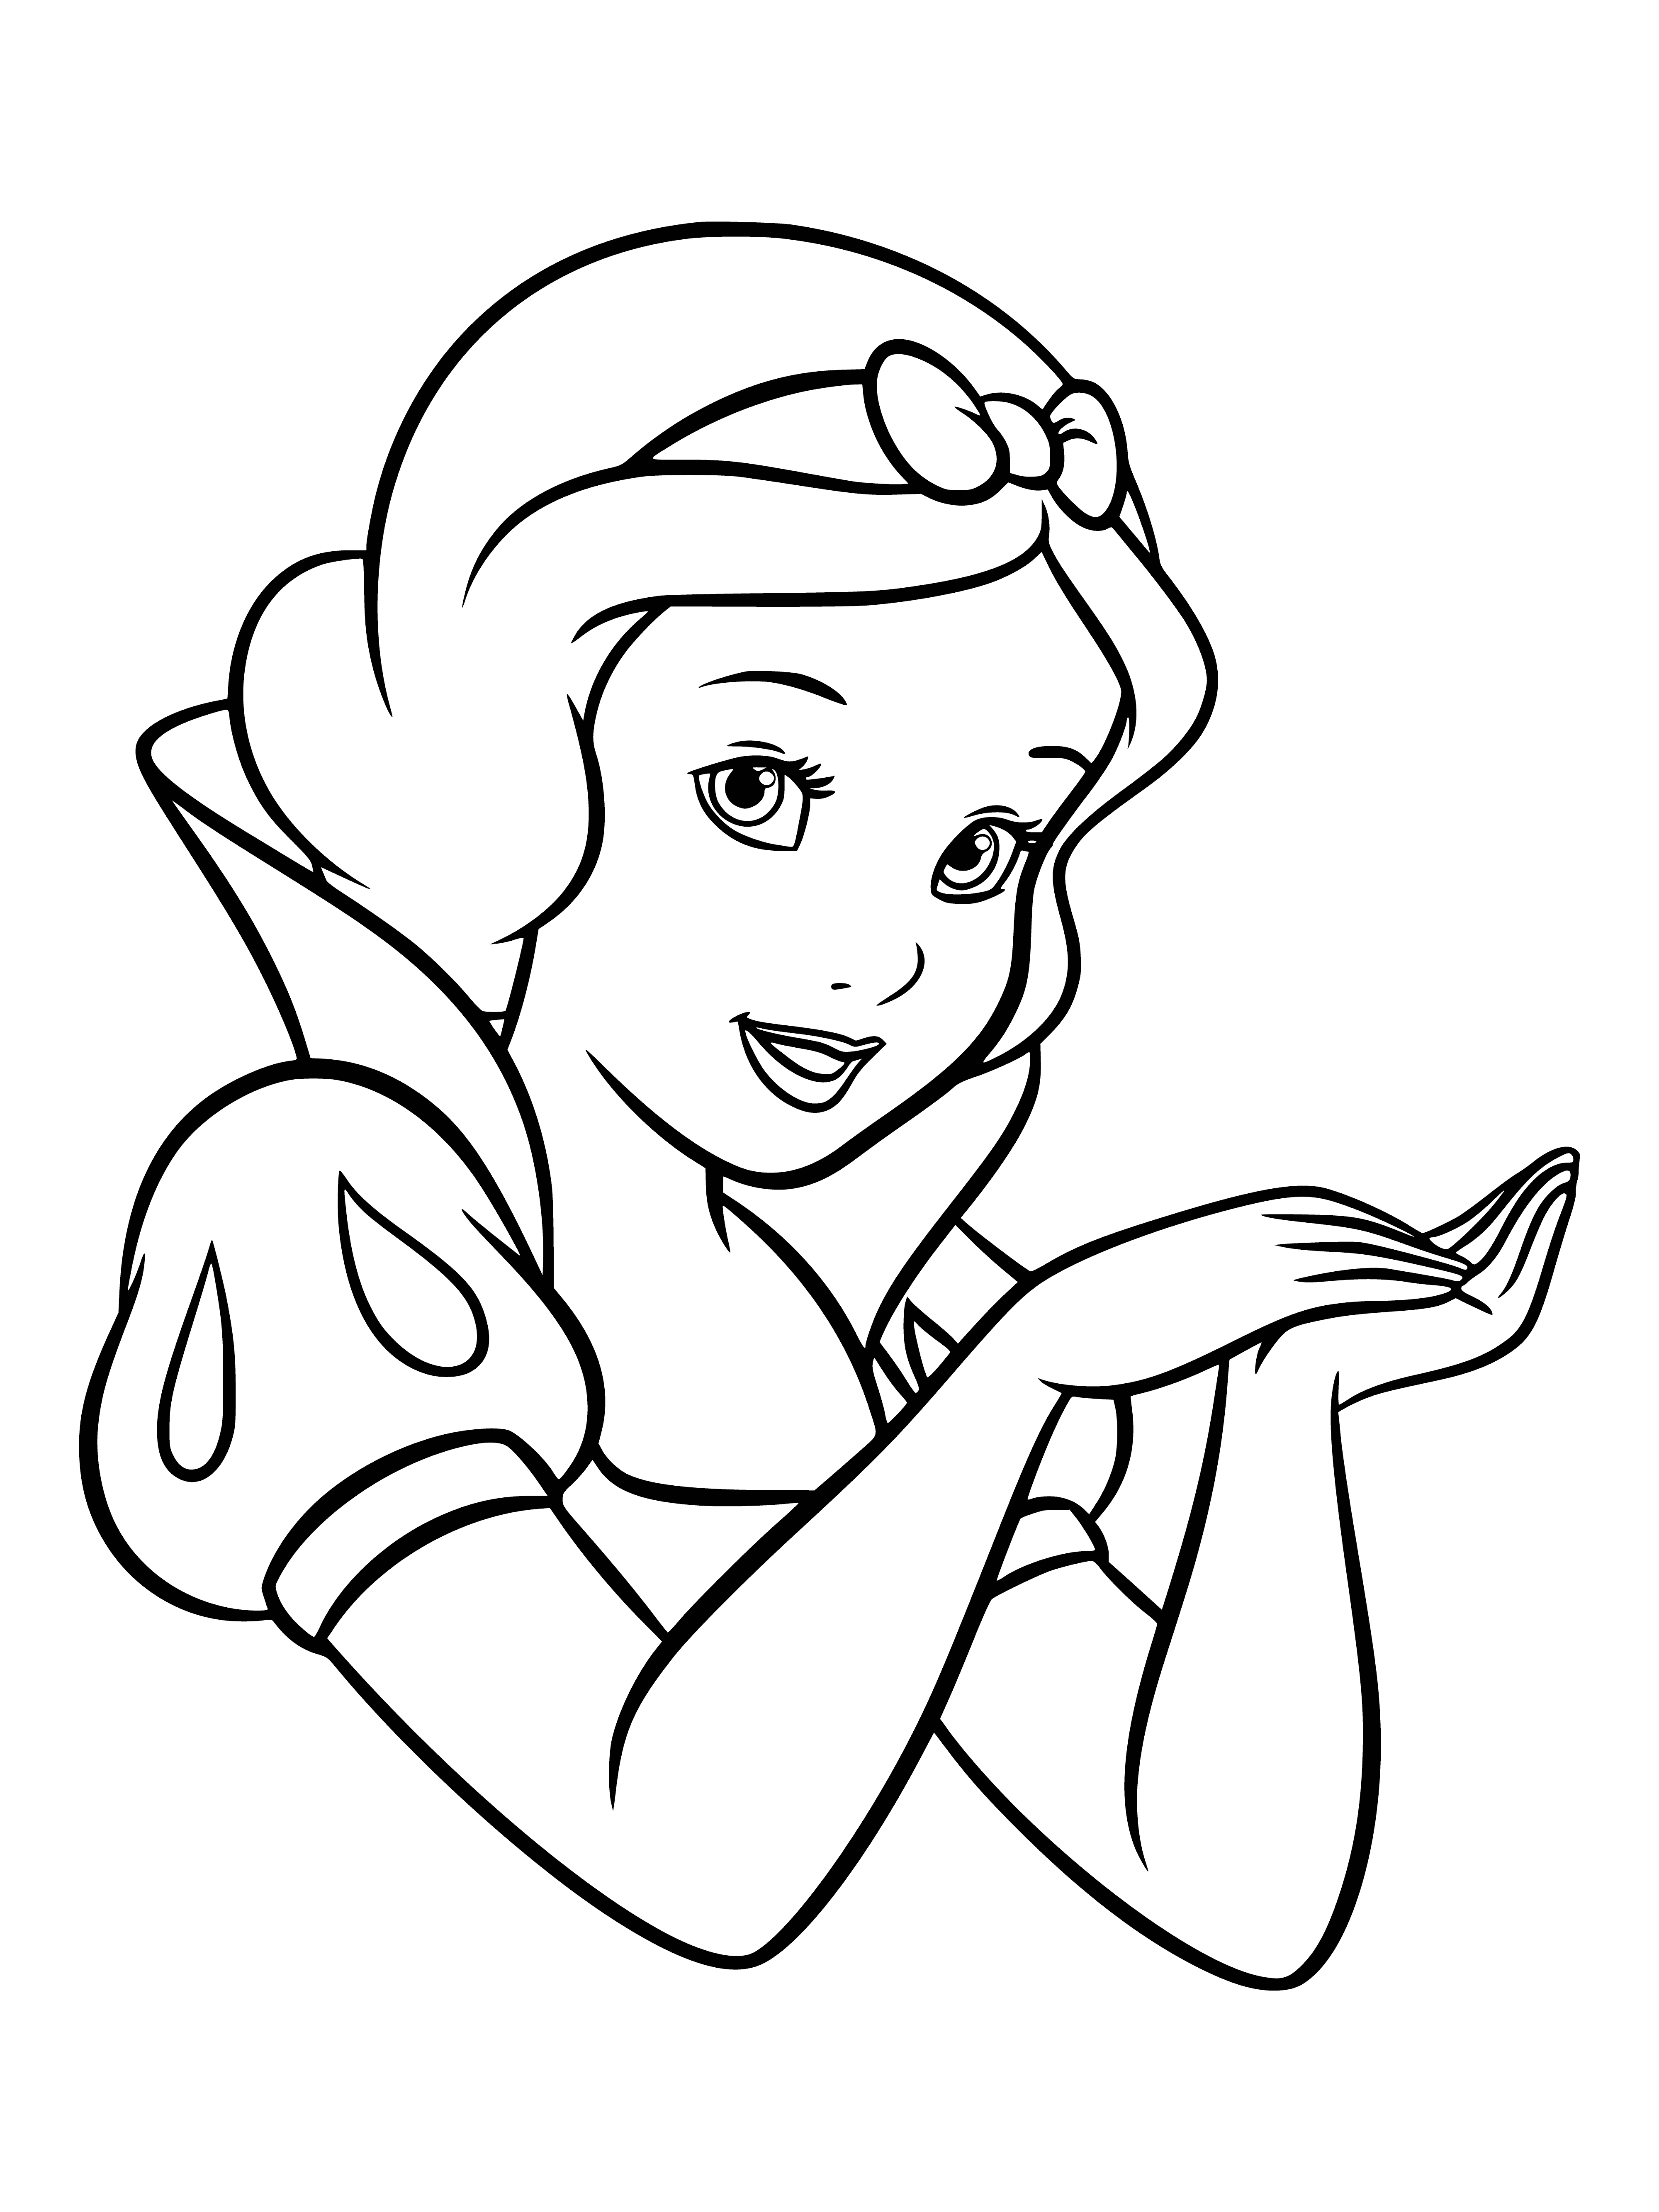 coloring page: Snow White is smiling at the seven dwarves in a light blue dress and white collar.